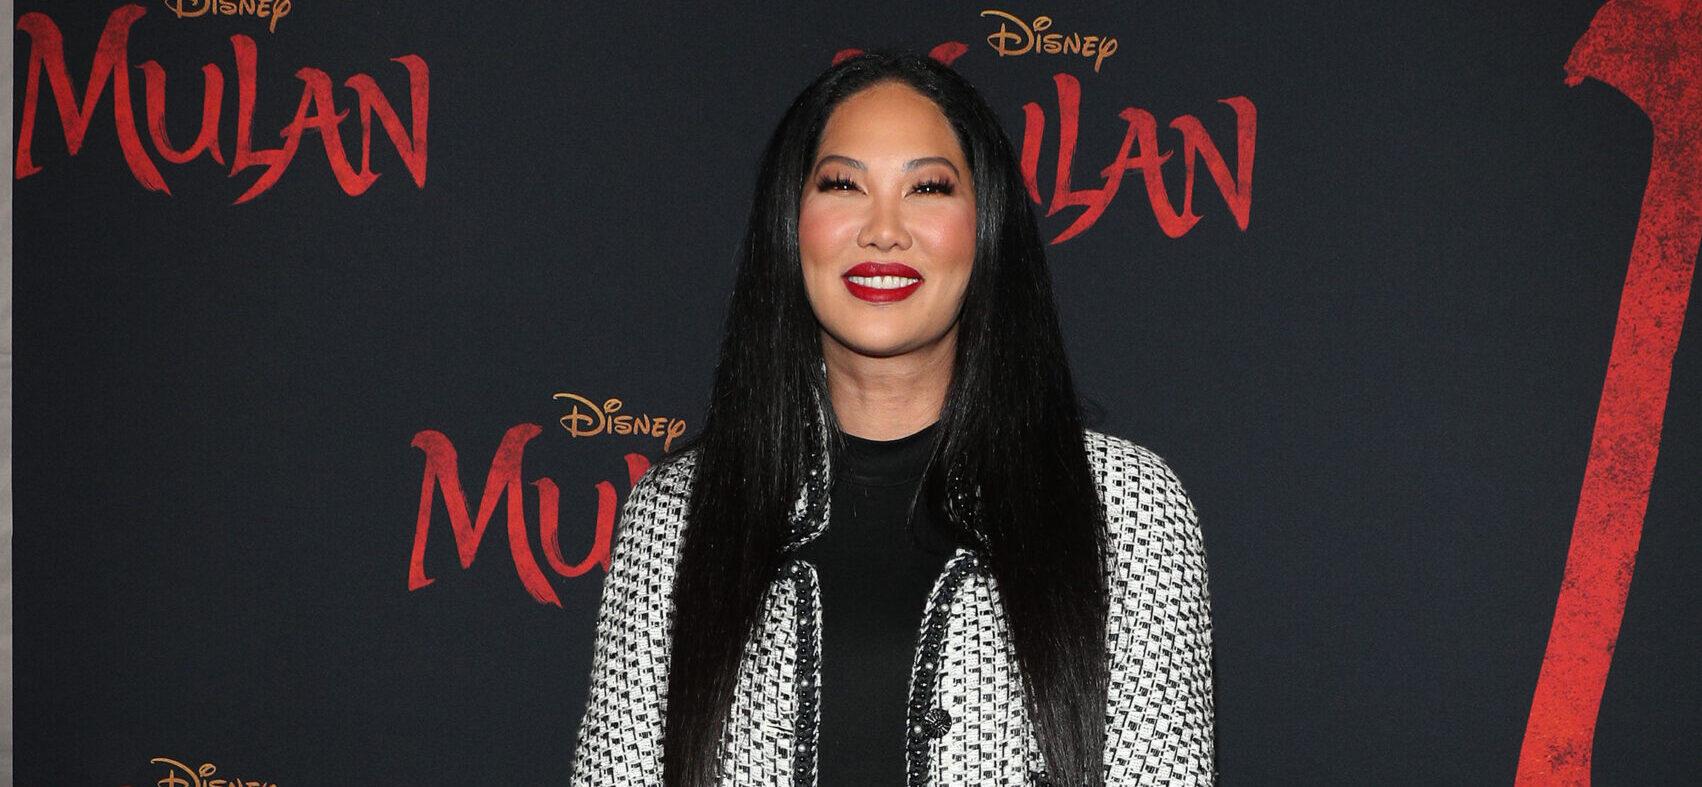 Kimora Lee Simmons Says Kids’ Trip To Japan Was For ‘Taking In A Culture’